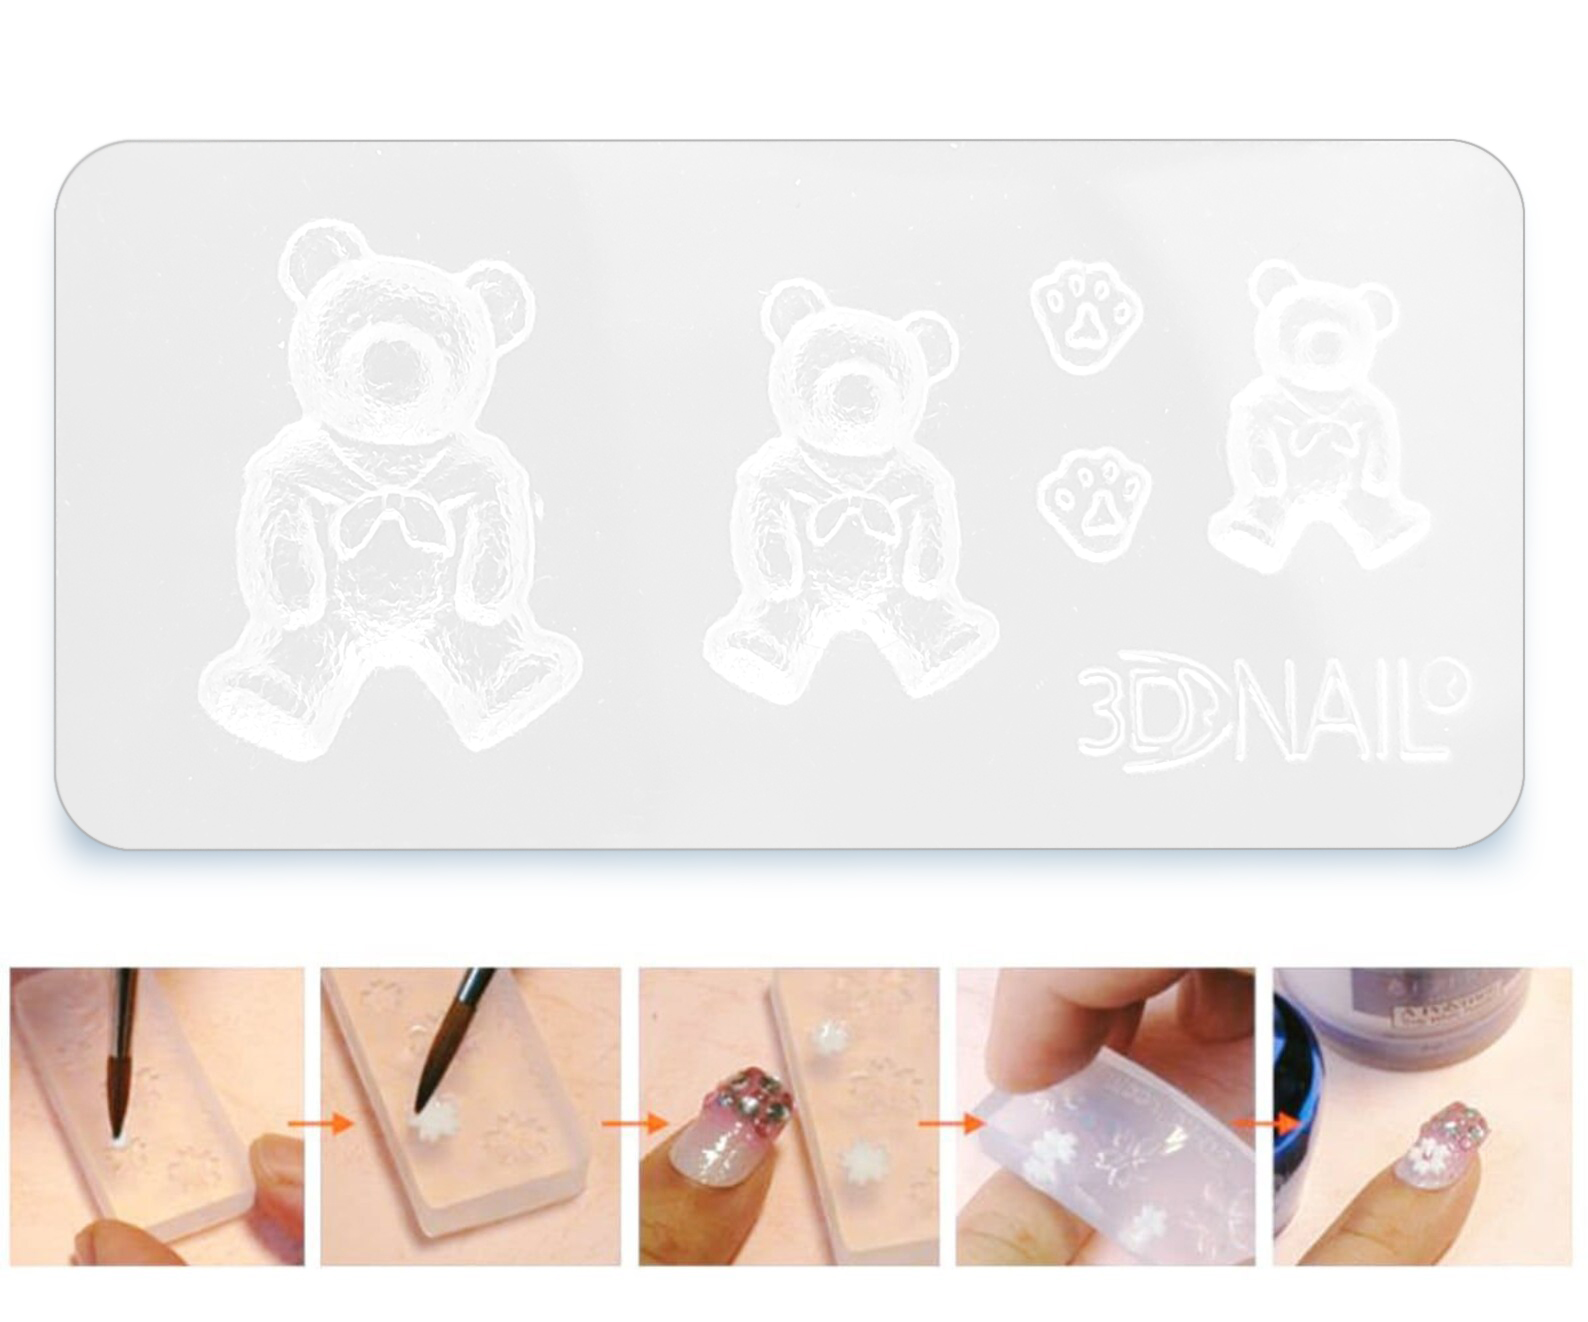 Silicone 3D Nail Art Polygel Mold